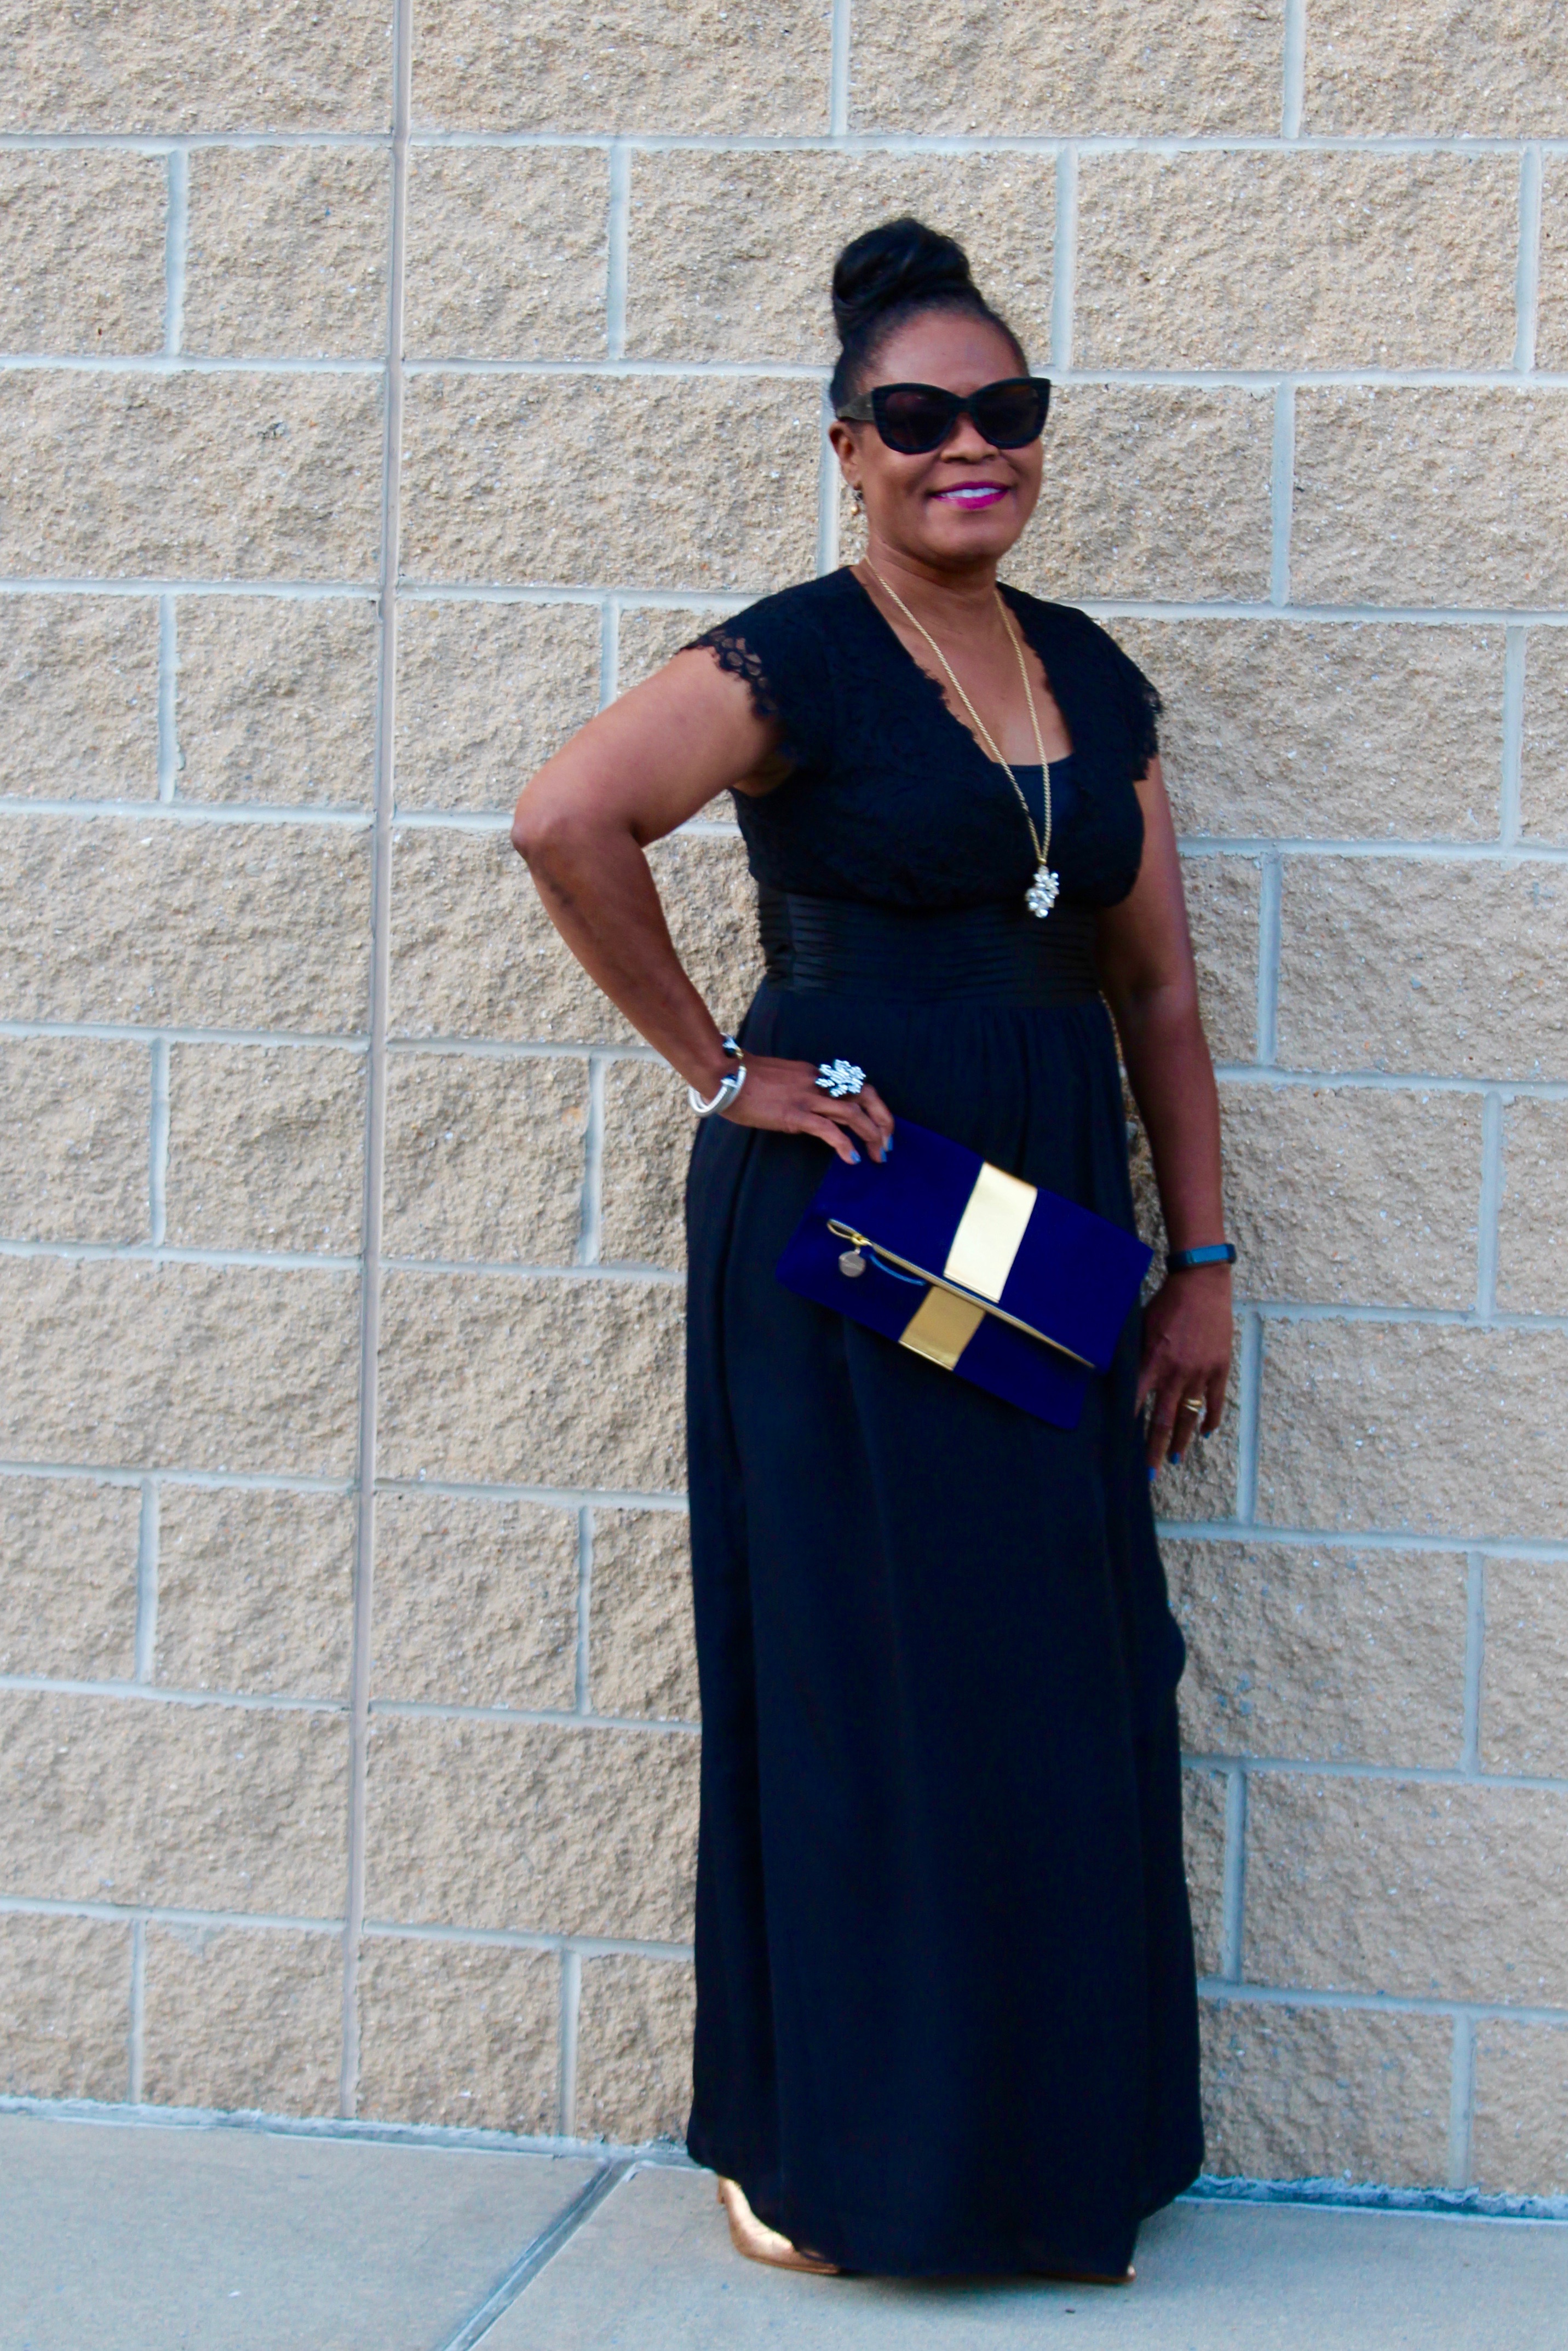 Wearing: old Nicole Miller Collection long dress, Clare V limited edition Vogue/VIP suede foldover clutch, Zara Gold Metallic Booties and J. Crew Factory necklace. 